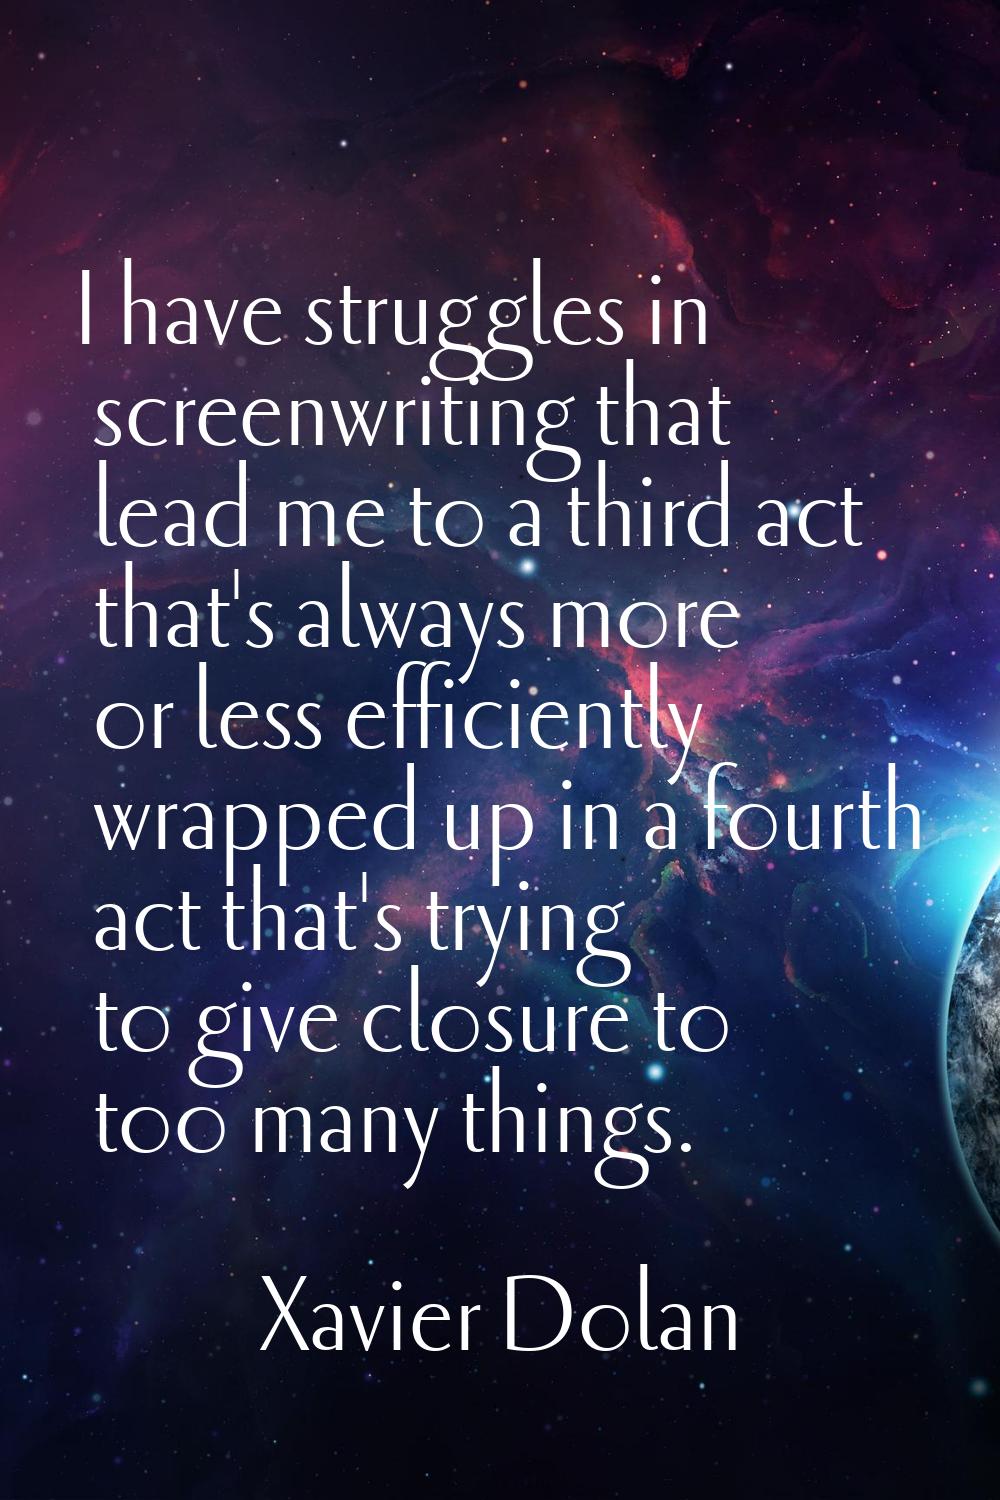 I have struggles in screenwriting that lead me to a third act that's always more or less efficientl